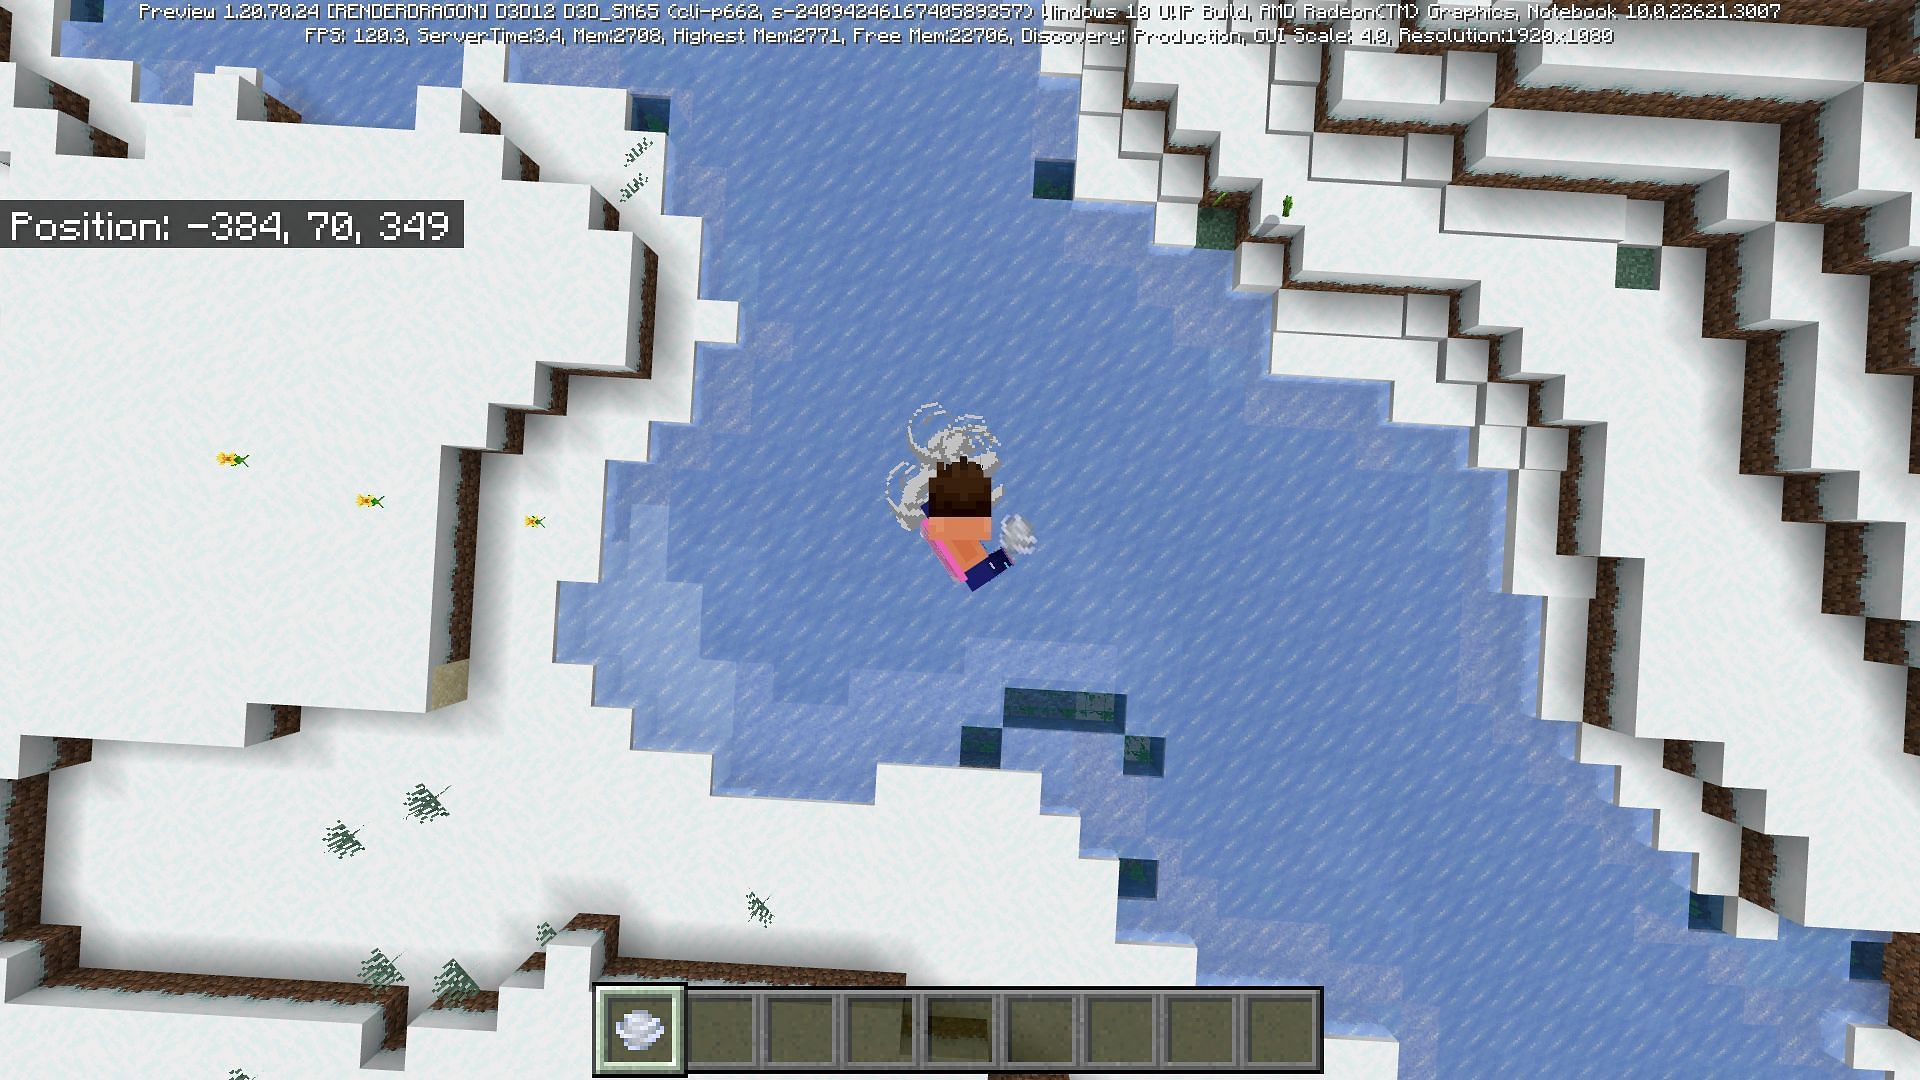 Players can use wind charges to launch themselves high in the air (Image via Mojang)